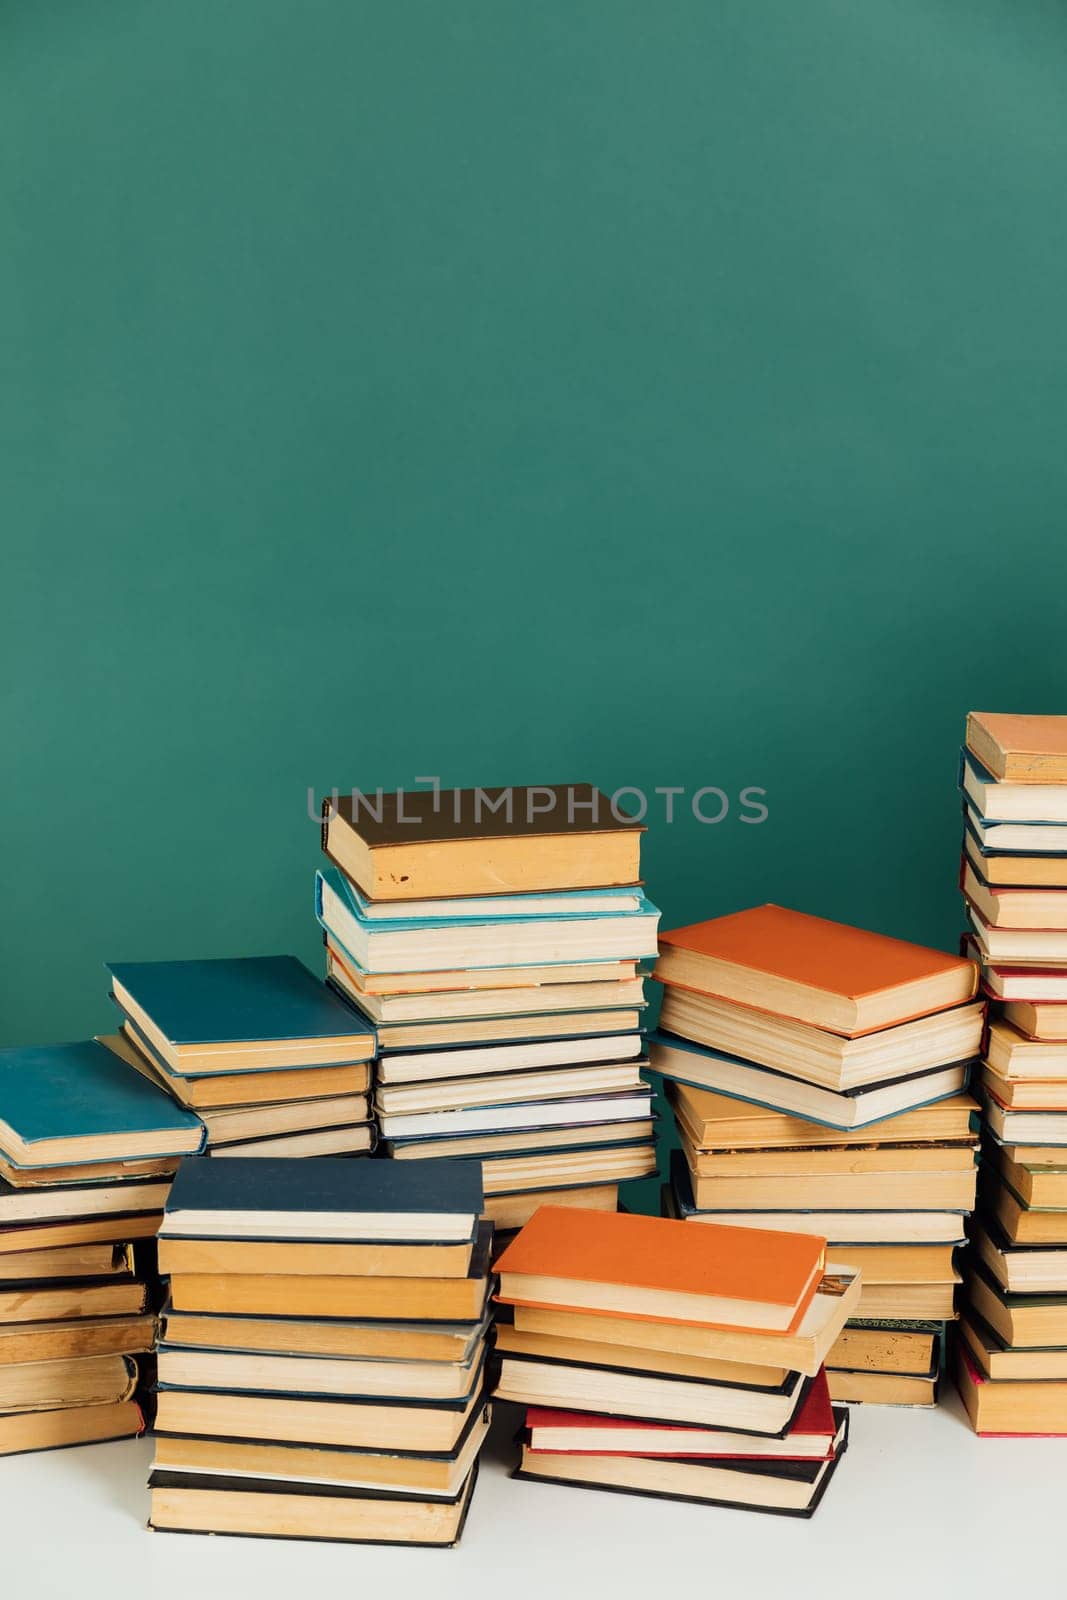 Stacks of educational books in university library on green background